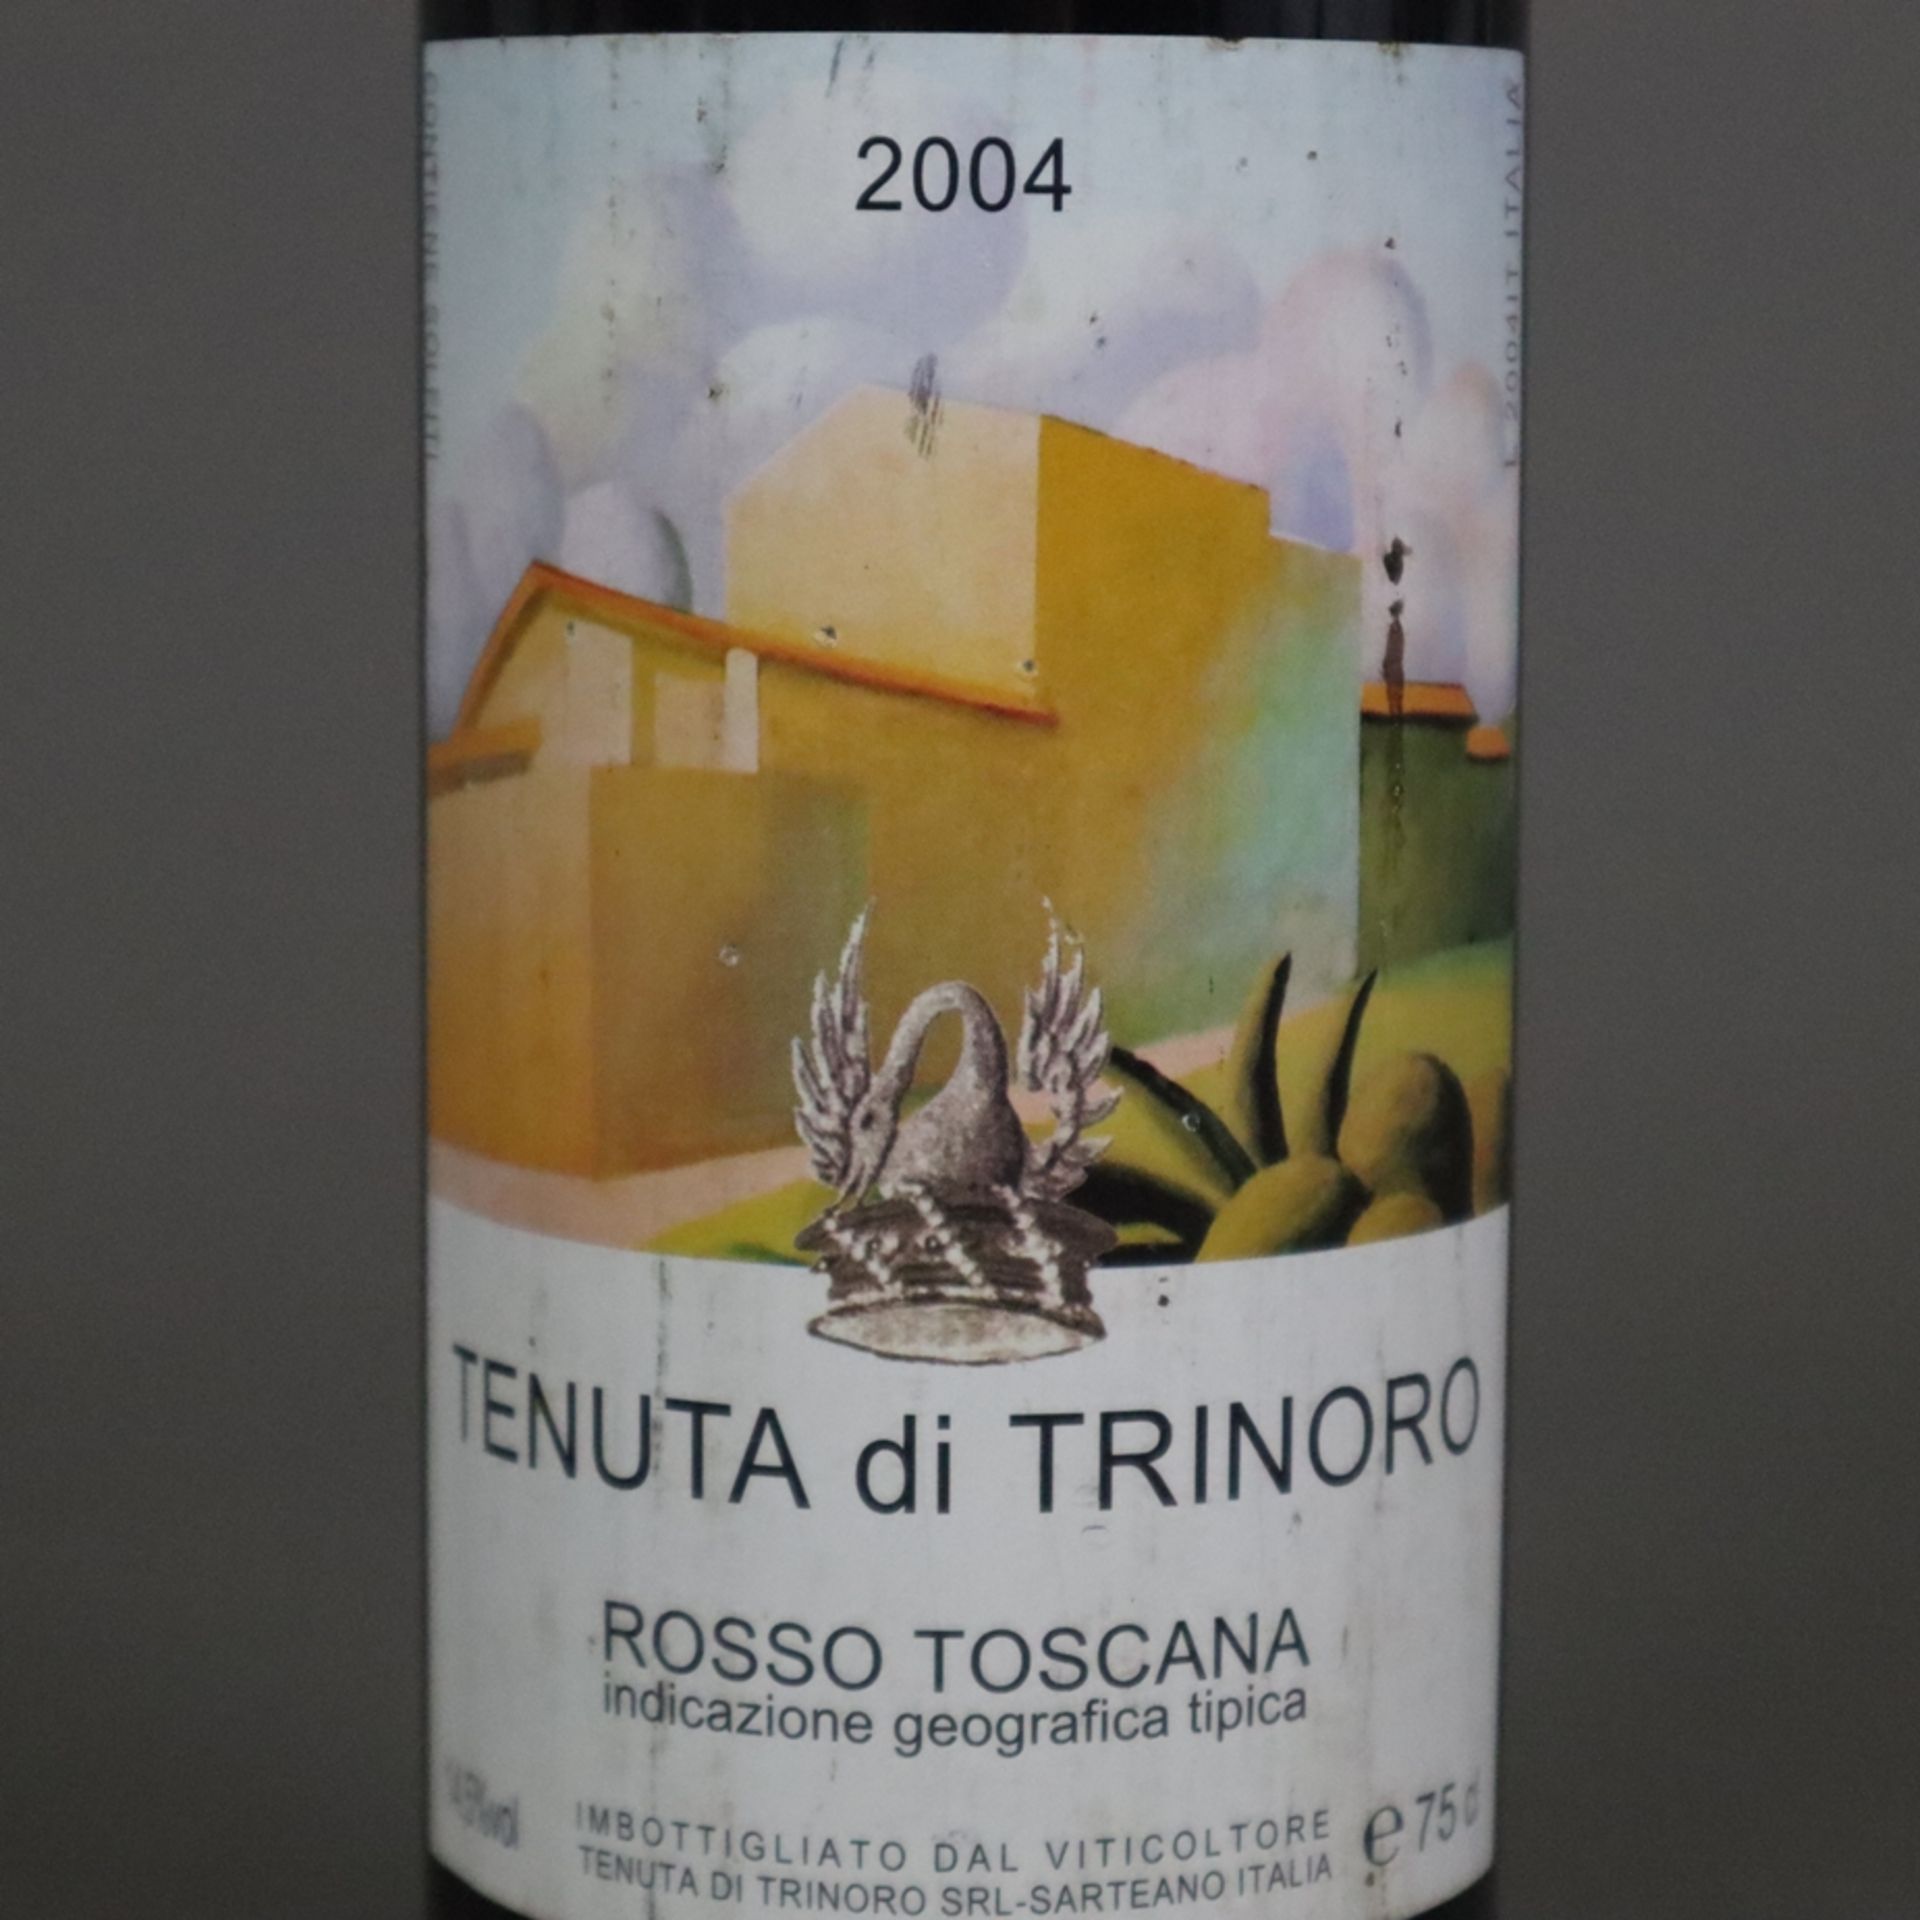 Wein - 2004 Tenuta di Trinoro Toscana IGT, Tuscany, Italy, Füllstand: Into Neck, 75 cl - Image 4 of 7